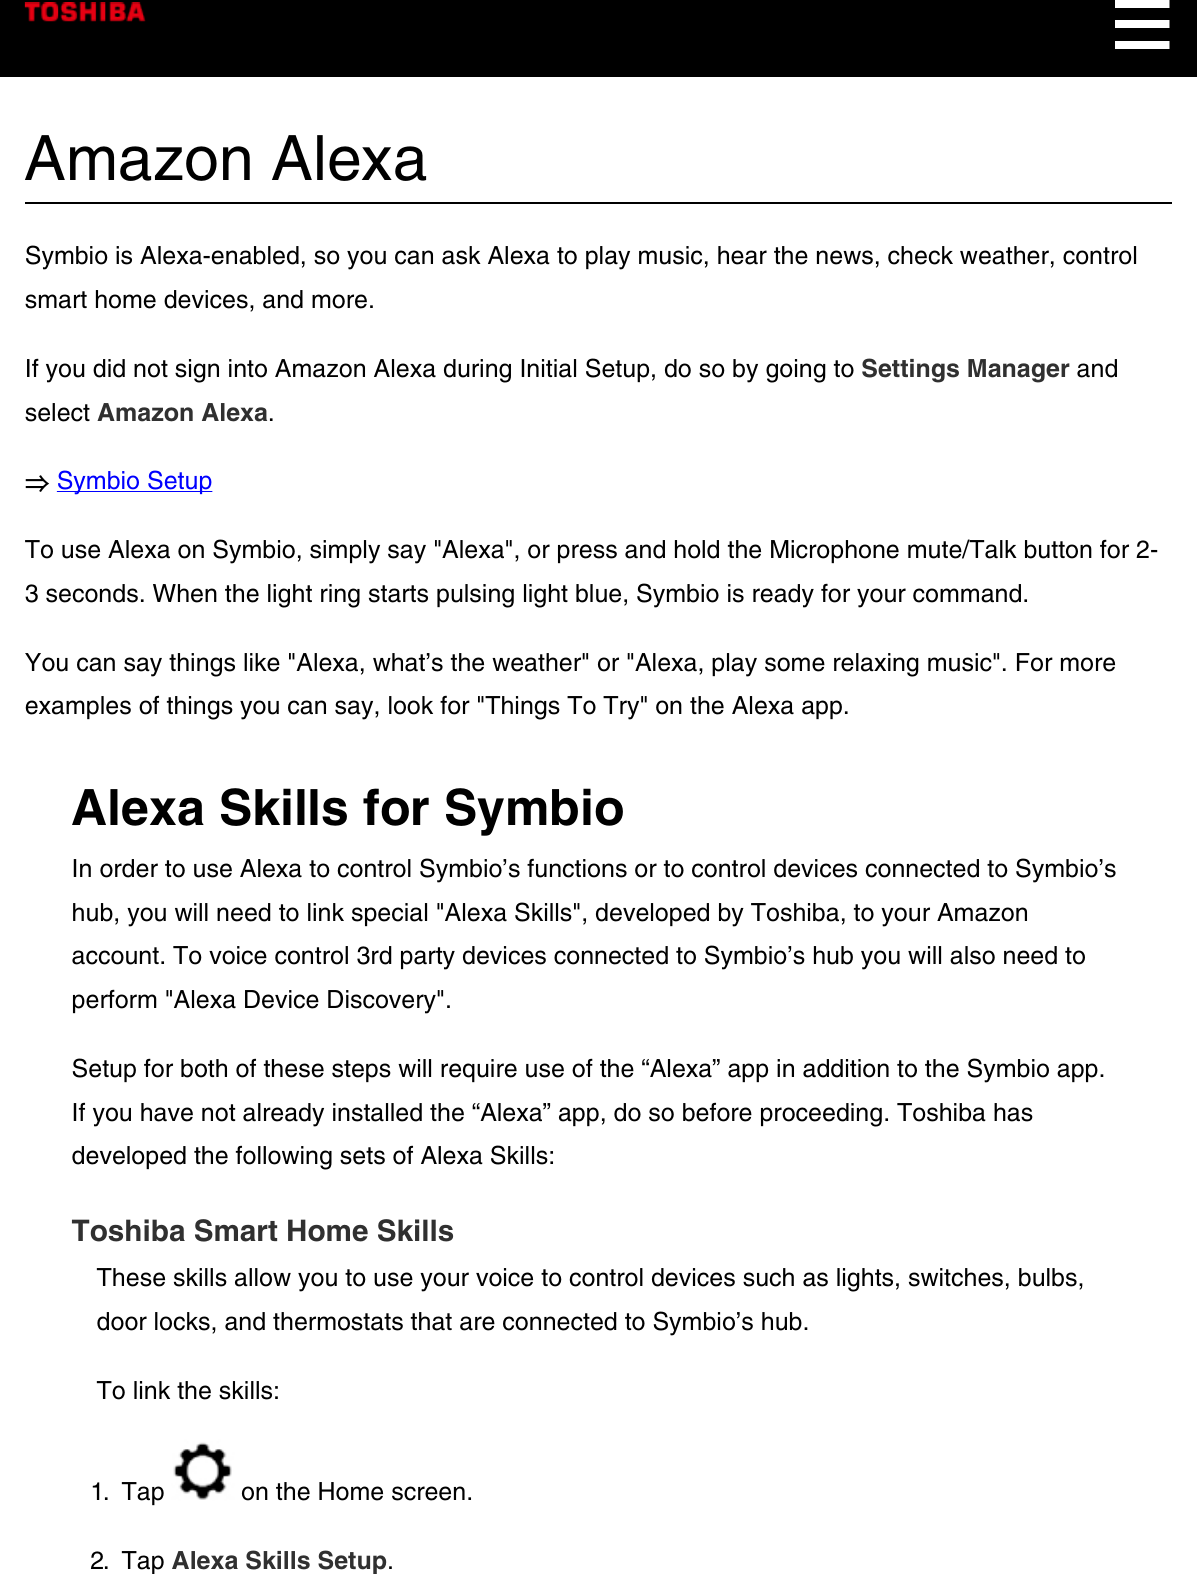 Amazon AlexaSymbio is Alexa-enabled, so you can ask Alexa to play music, hear the news, check weather, controlsmart home devices, and more.If you did not sign into Amazon Alexa during Initial Setup, do so by going to Settings Manager andselect Amazon Alexa.⇒ Symbio SetupTo use Alexa on Symbio, simply say &quot;Alexa&quot;, or press and hold the Microphone mute/Talk button for 2-3 seconds. When the light ring starts pulsing light blue, Symbio is ready for your command.You can say things like &quot;Alexa, what’s the weather&quot; or &quot;Alexa, play some relaxing music&quot;. For moreexamples of things you can say, look for &quot;Things To Try&quot; on the Alexa app.Alexa Skills for SymbioIn order to use Alexa to control Symbio’s functions or to control devices connected to Symbio’shub, you will need to link special &quot;Alexa Skills&quot;, developed by Toshiba, to your Amazonaccount. To voice control 3rd party devices connected to Symbio’s hub you will also need toperform &quot;Alexa Device Discovery&quot;.Setup for both of these steps will require use of the “Alexa” app in addition to the Symbio app.If you have not already installed the “Alexa” app, do so before proceeding. Toshiba hasdeveloped the following sets of Alexa Skills:Toshiba Smart Home SkillsThese skills allow you to use your voice to control devices such as lights, switches, bulbs,door locks, and thermostats that are connected to Symbio’s hub.To link the skills:1.  Tap   on the Home screen.2.  Tap Alexa Skills Setup.